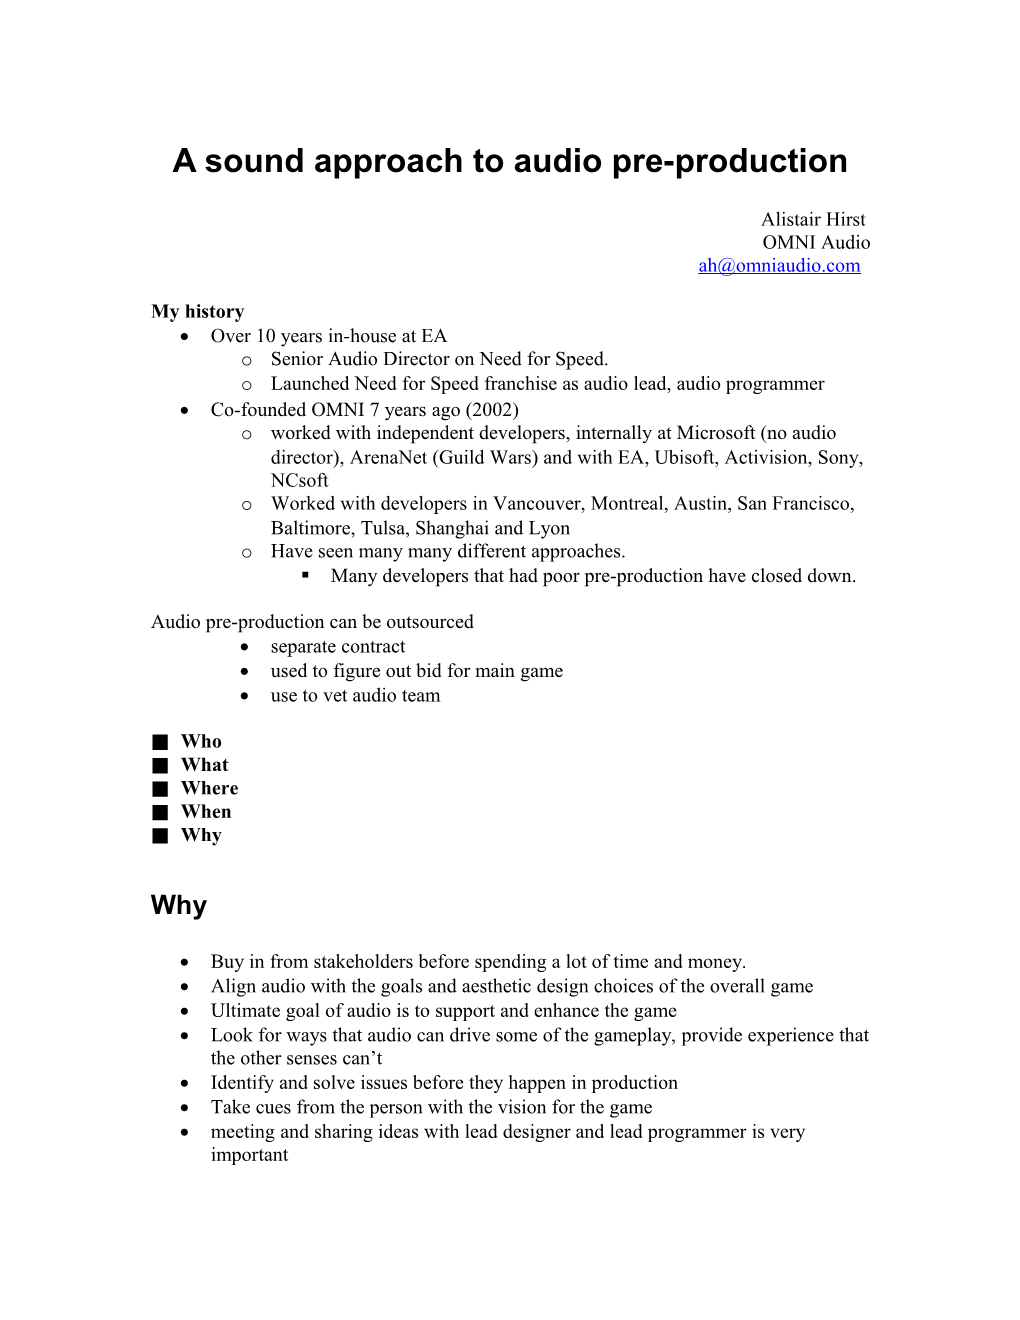 A Sound Approach to Audio Pre-Production